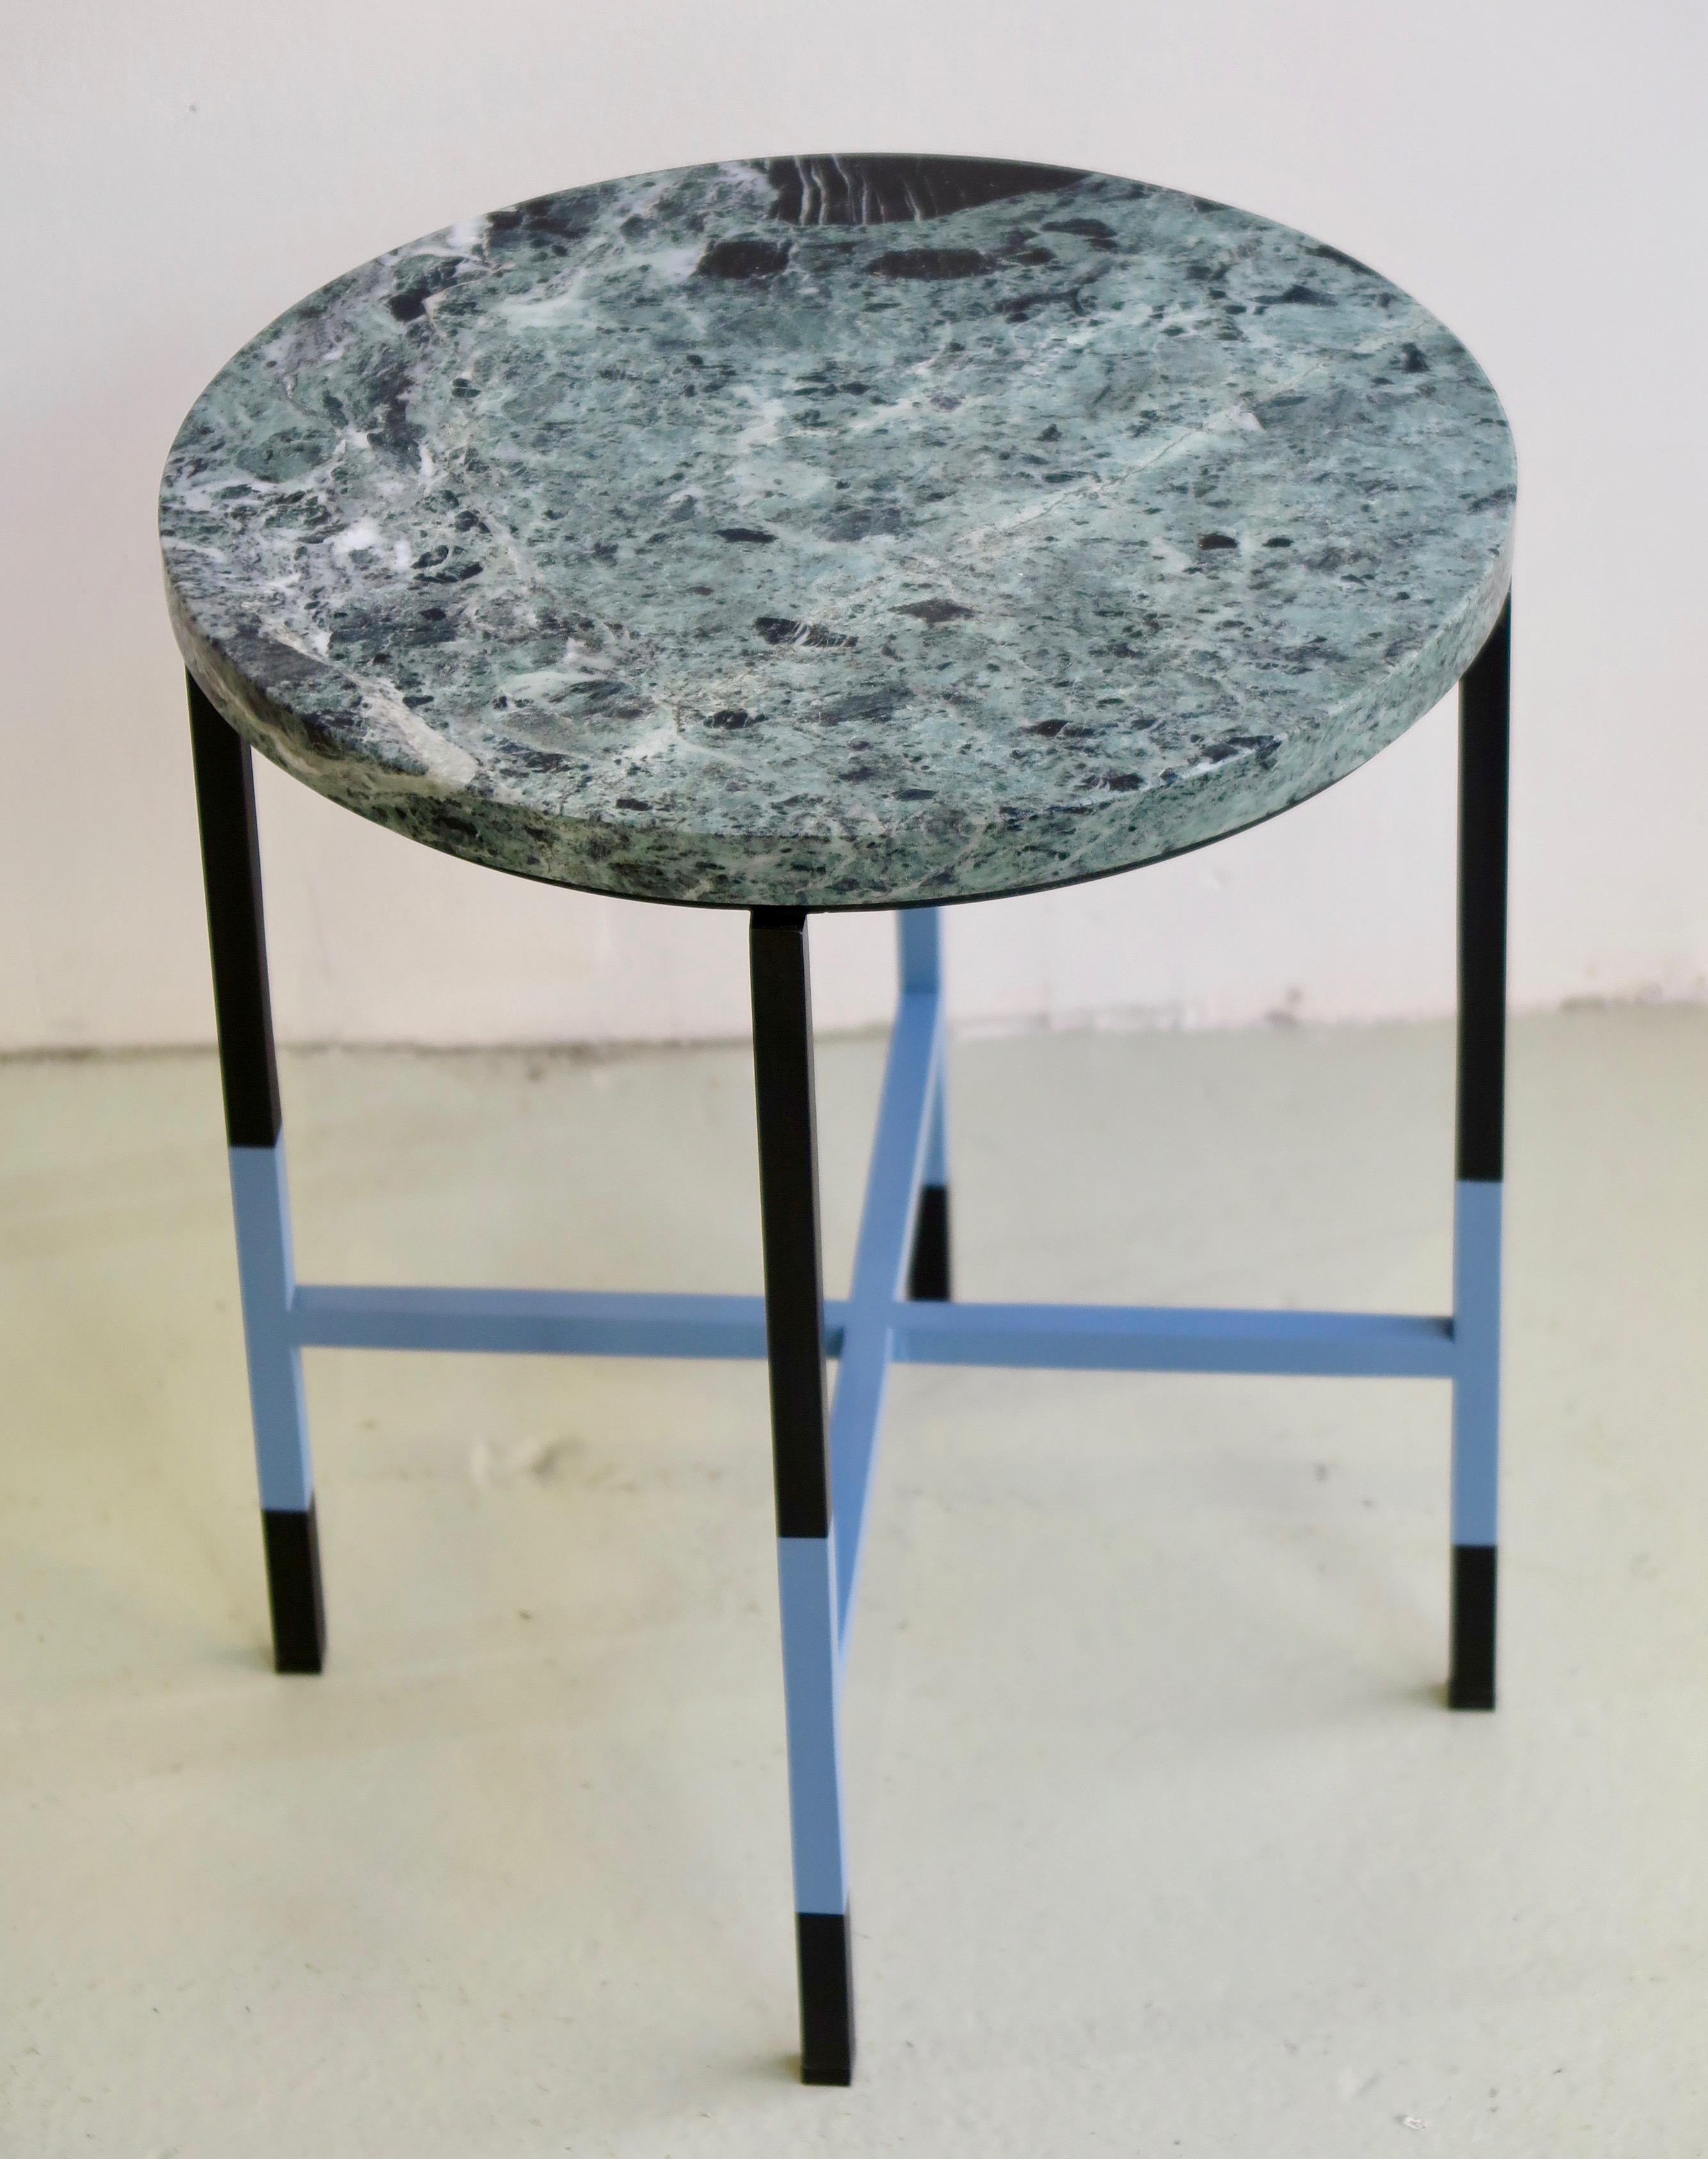 Two unique small side tables with marble tops and painted iron bases, Italy, 2017. Signed and numbered.
The tables have different heights:
height 18.5